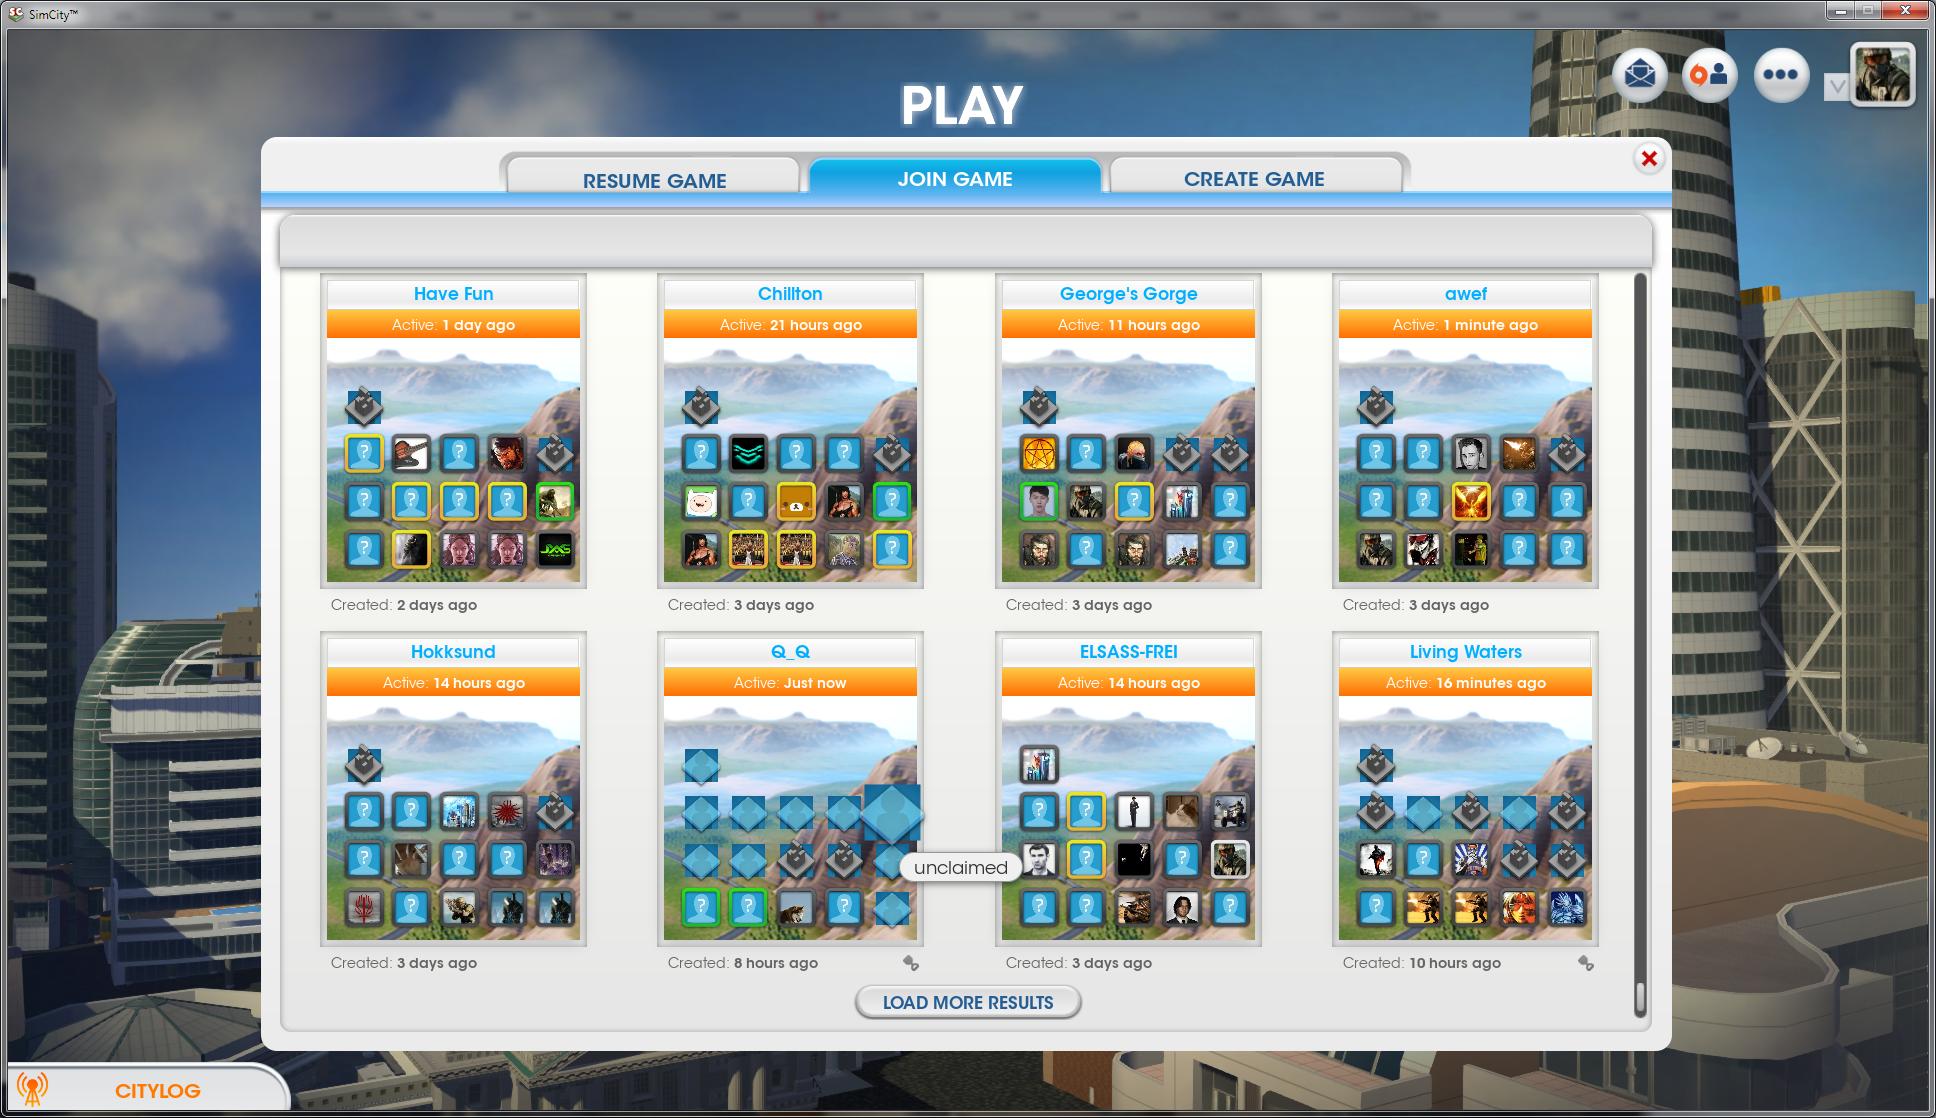 SimCity Mod Shows Abandoned/Unclaimed Cities in Region Selection Menu